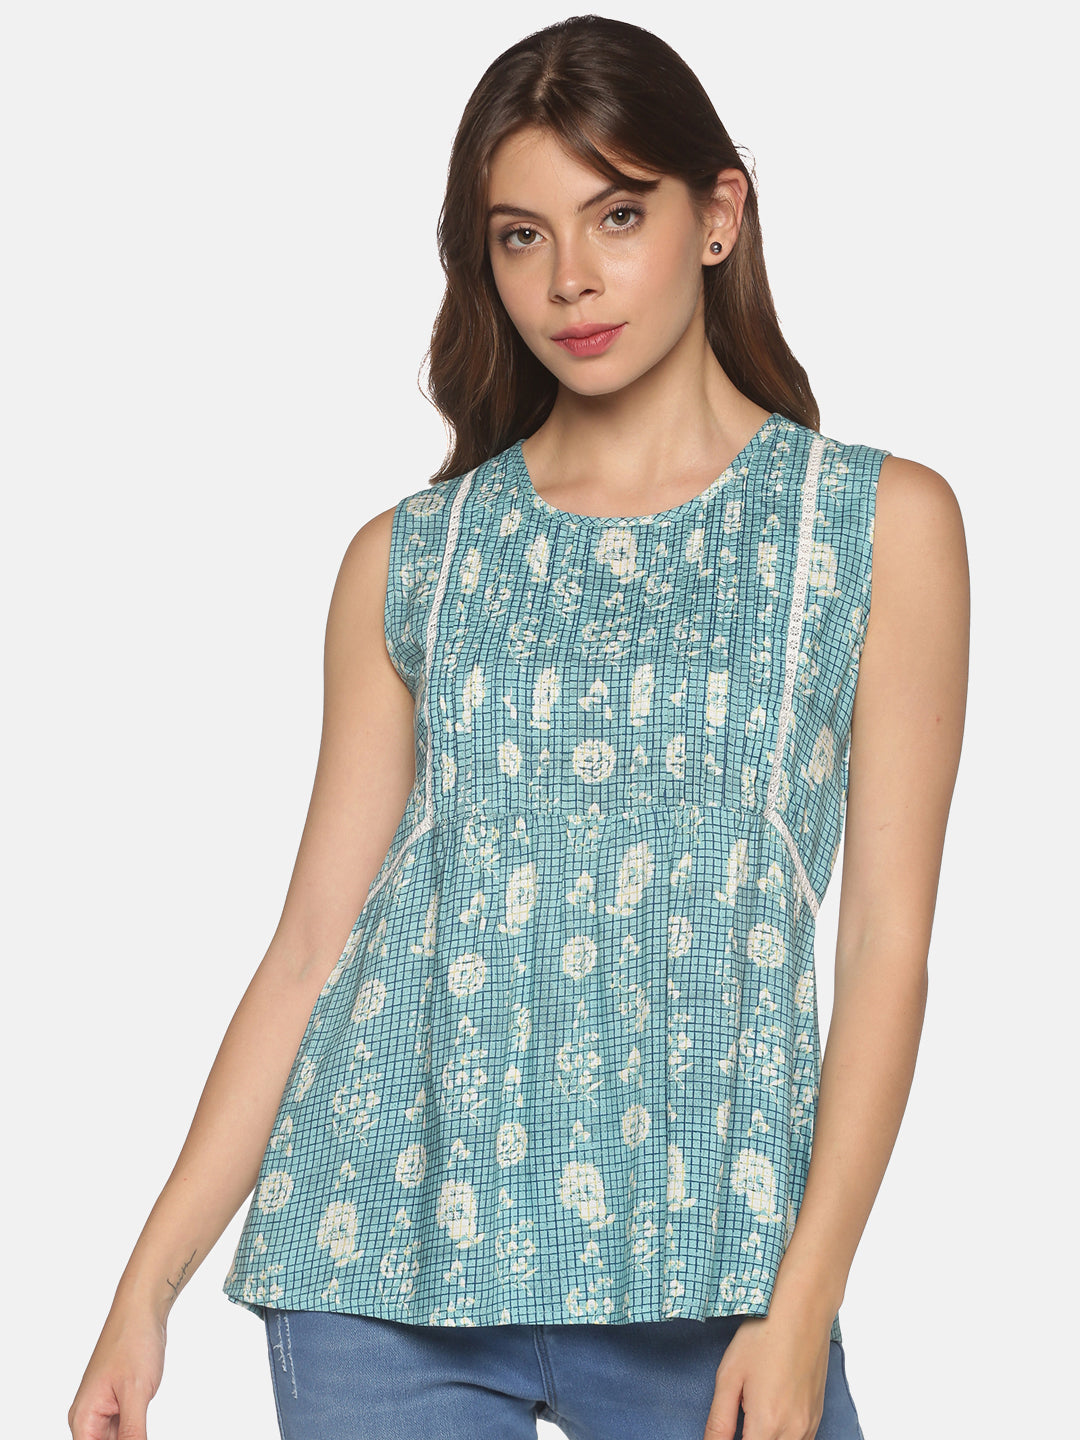 Blue Floral Printed Top with Pleats & Lace Inserts on Front Yoke